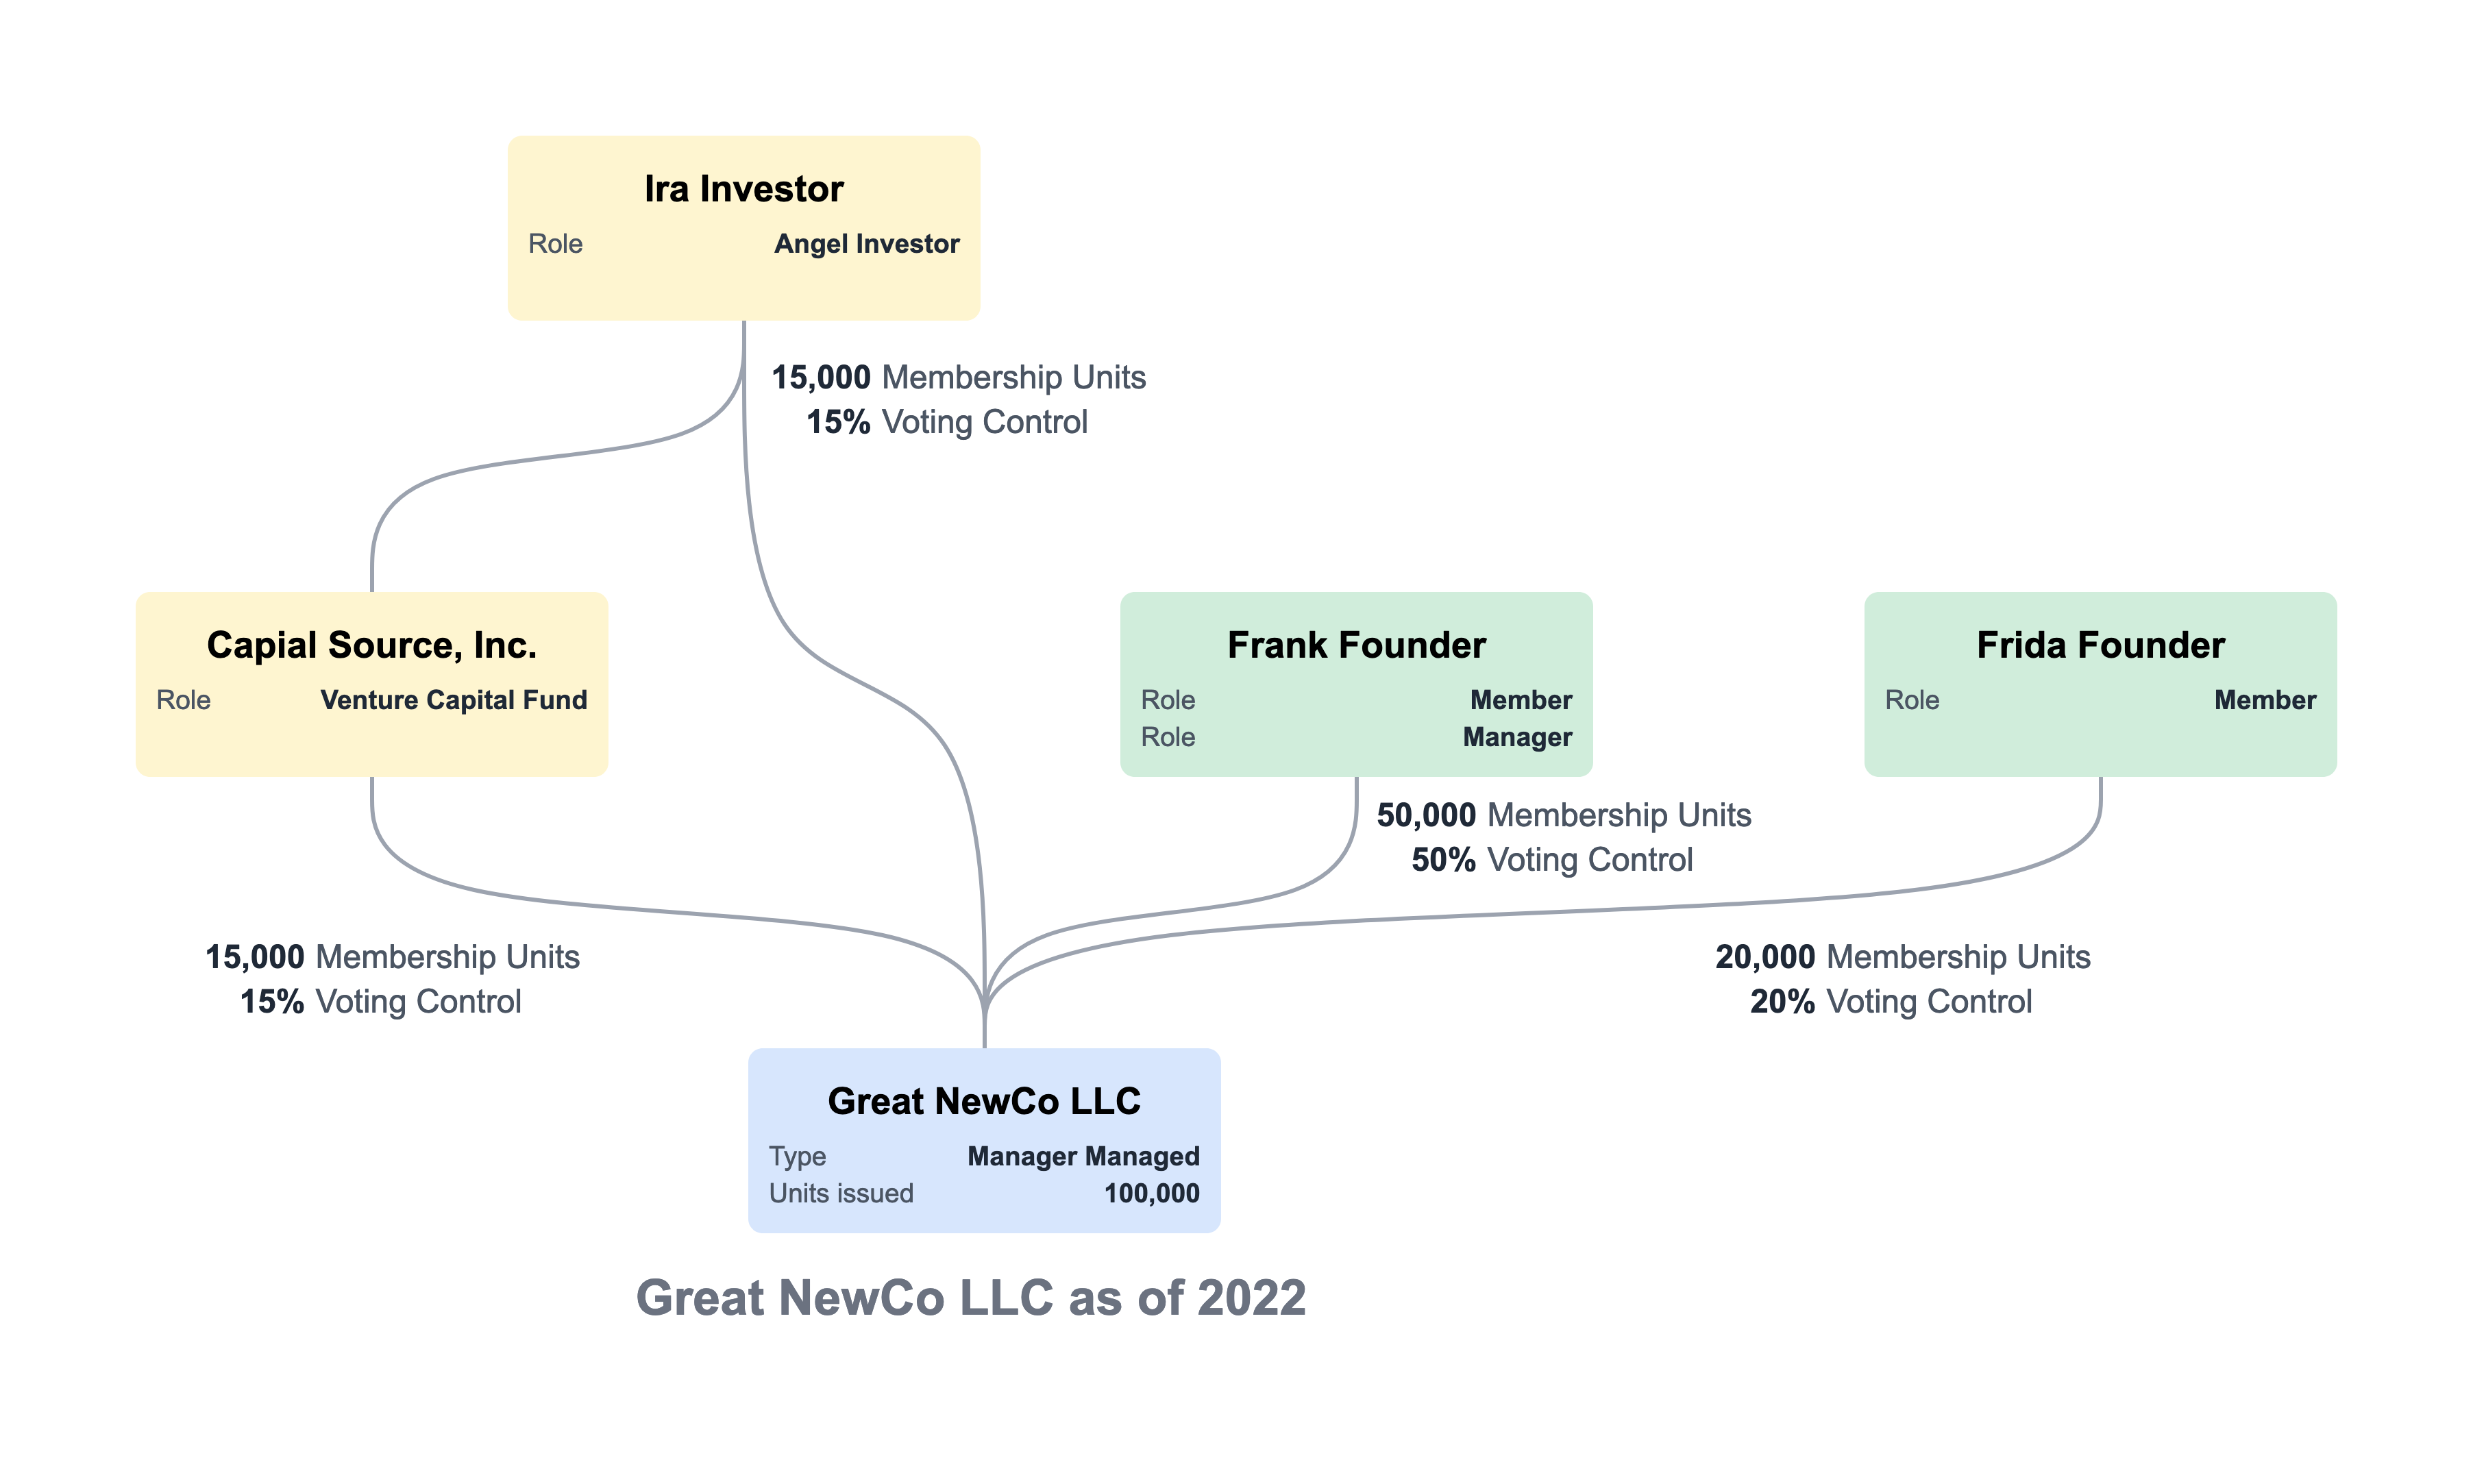 Company structure changes as of 2022